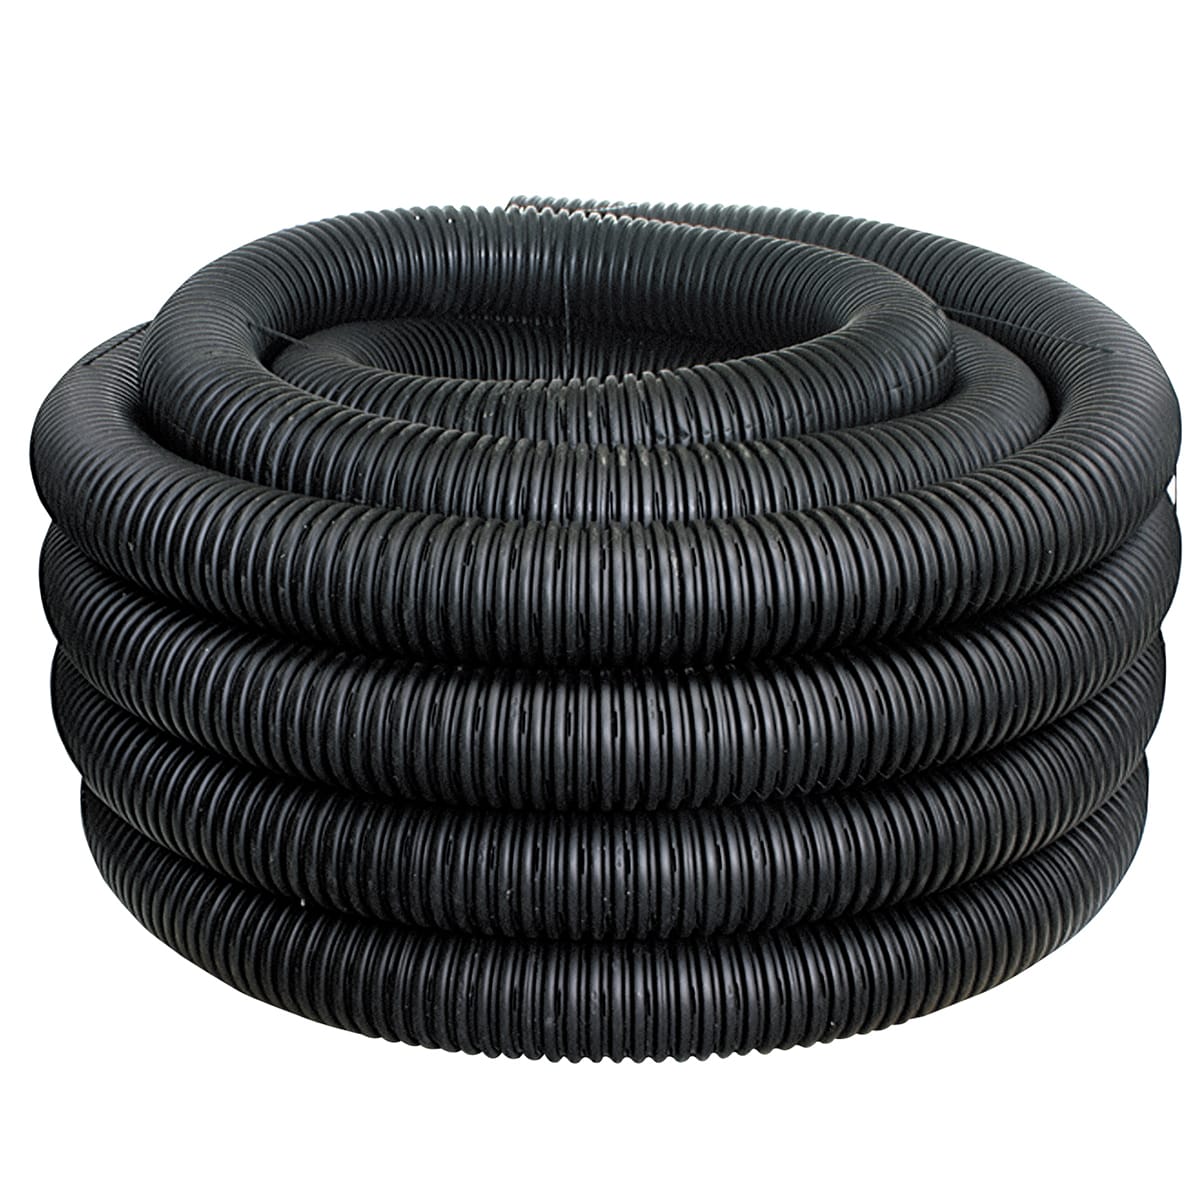 4" x 25' Expandable Corrugated Drainage Solid Pipe Home Yard Plumbing Drain Tube 